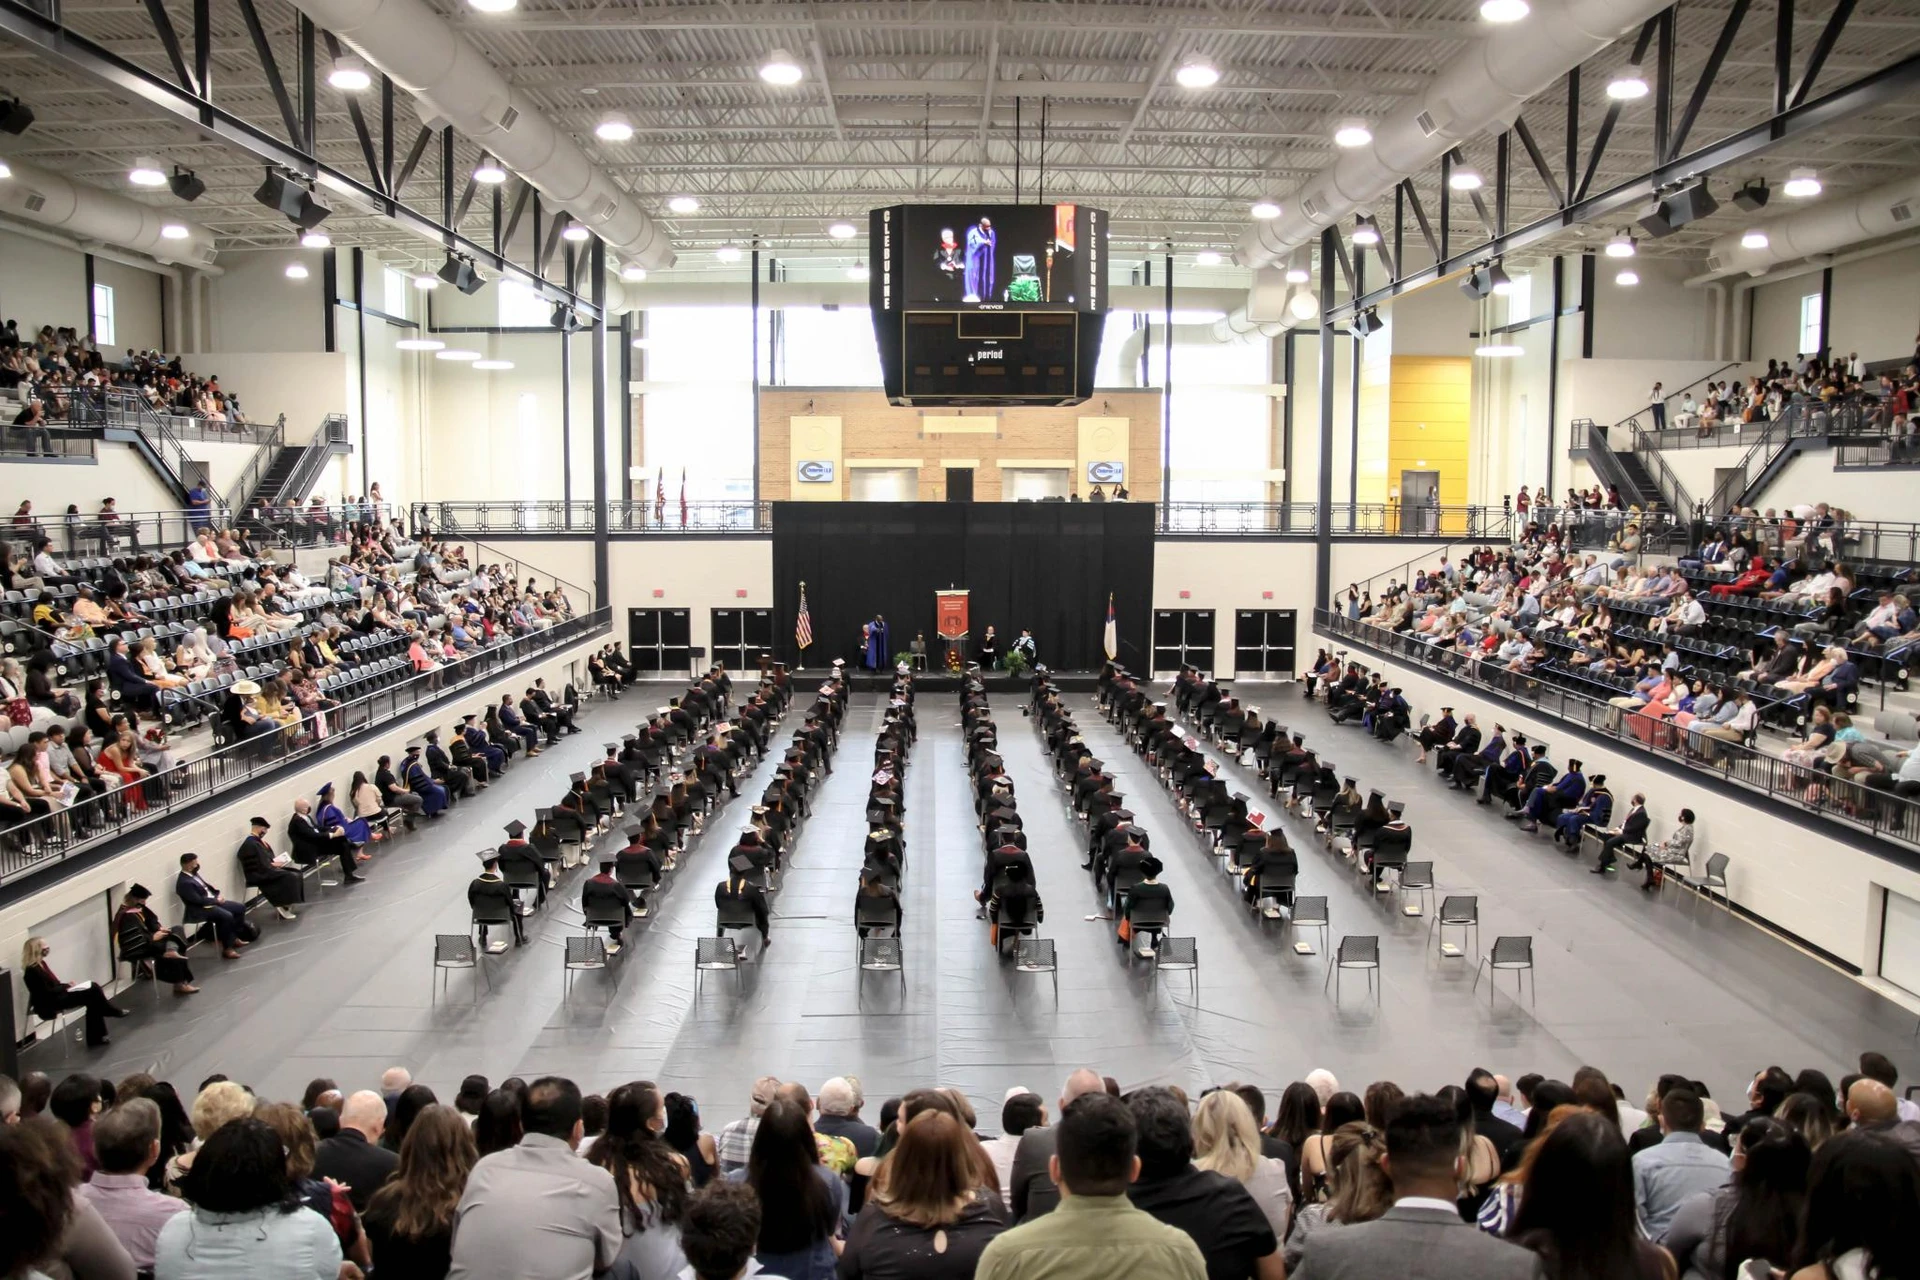 Graduates sitting in rows in a large stadium with guests to the right, left, and back and the stage to the front